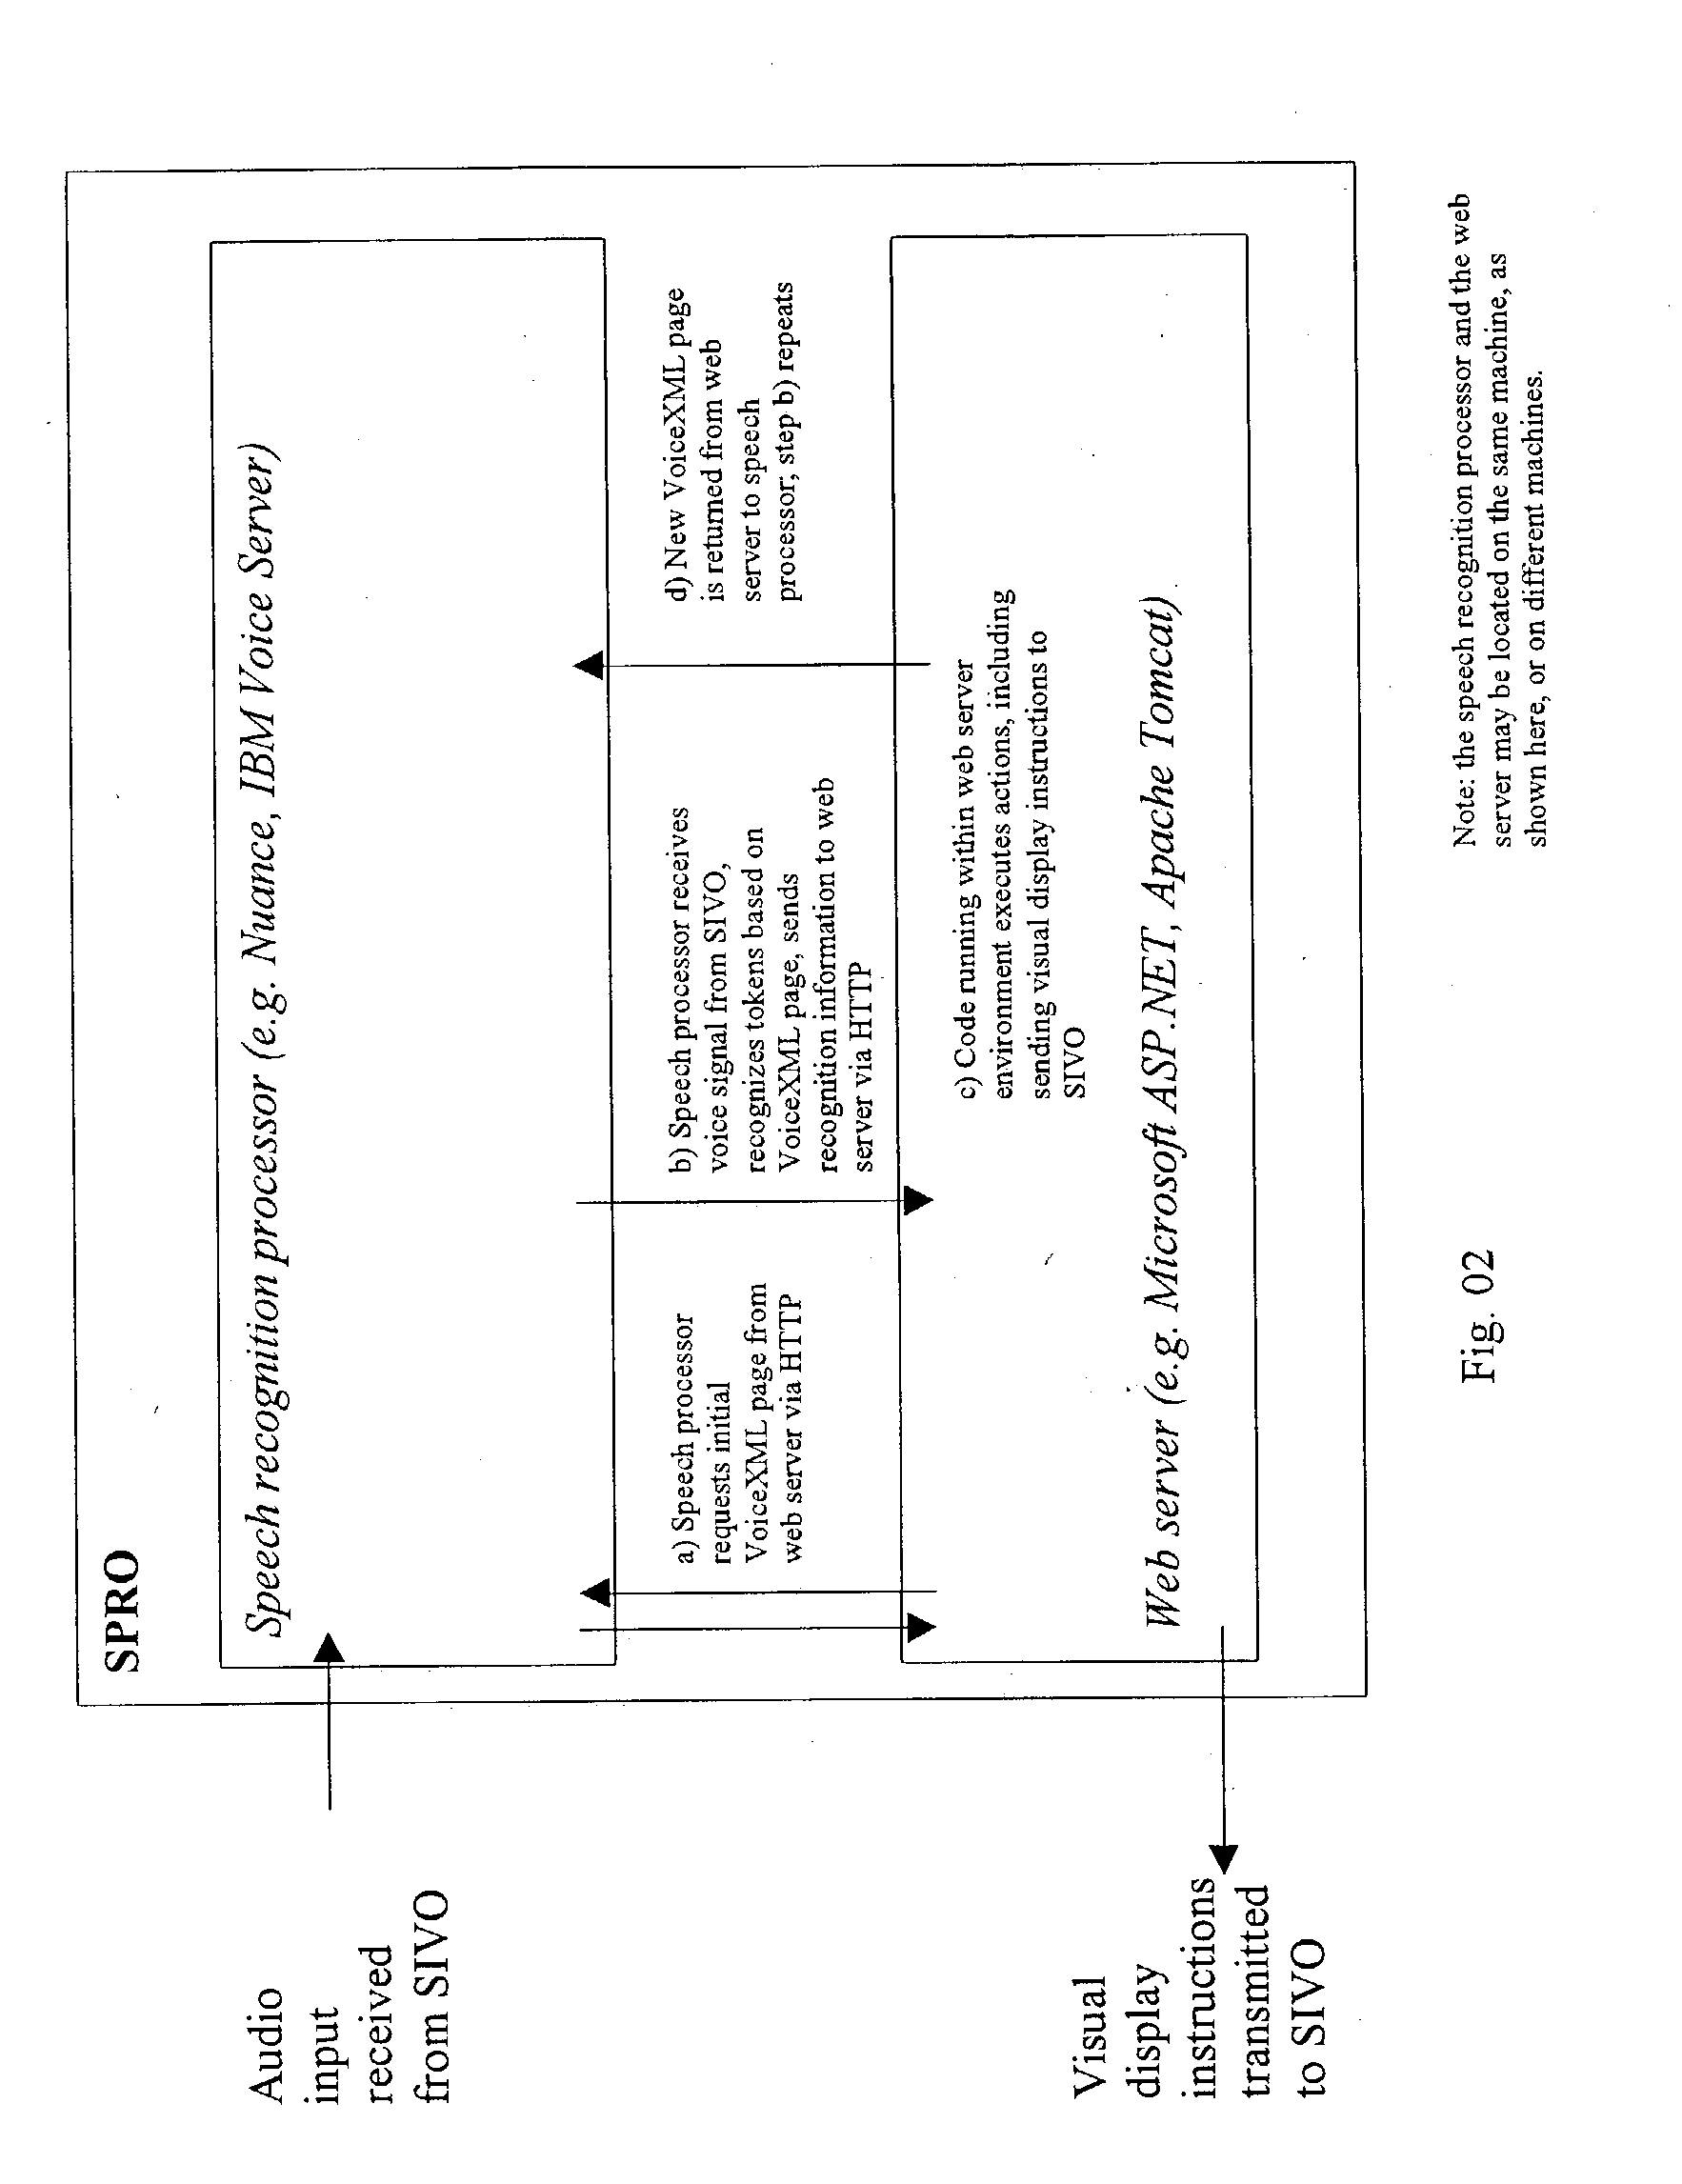 Use of local voice input and remote voice processing to control a local visual display